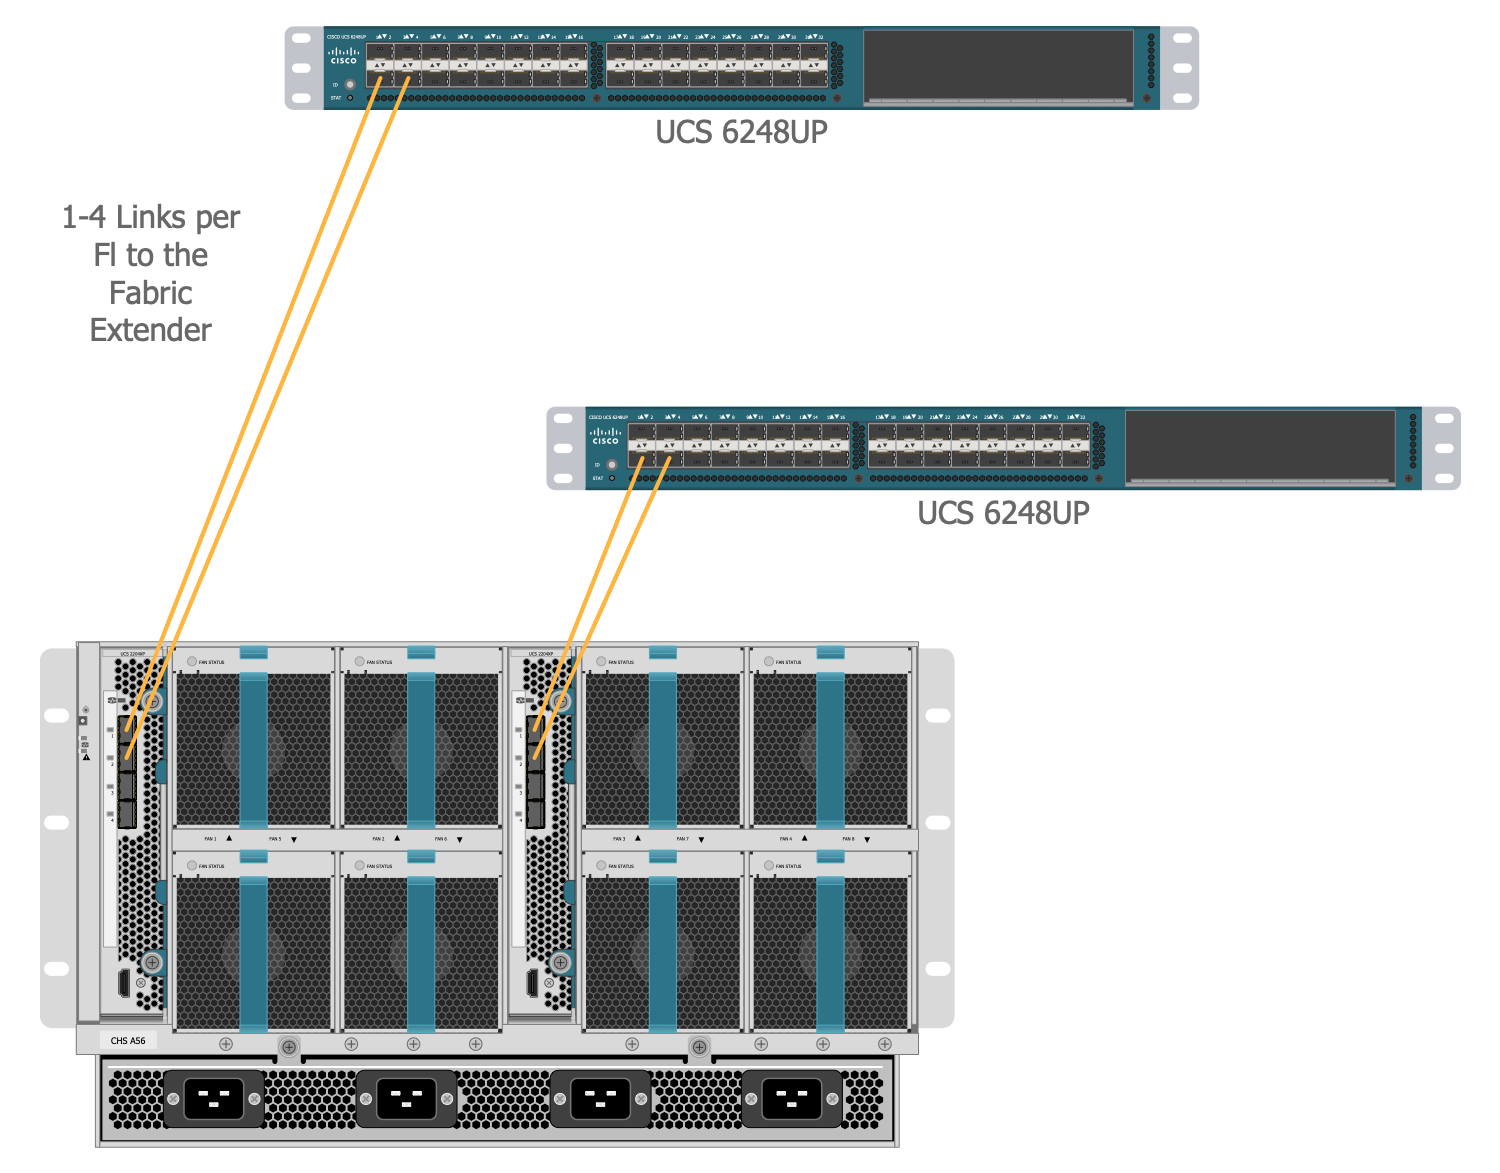 Cisco UCS 5108 Chassis Connectivity